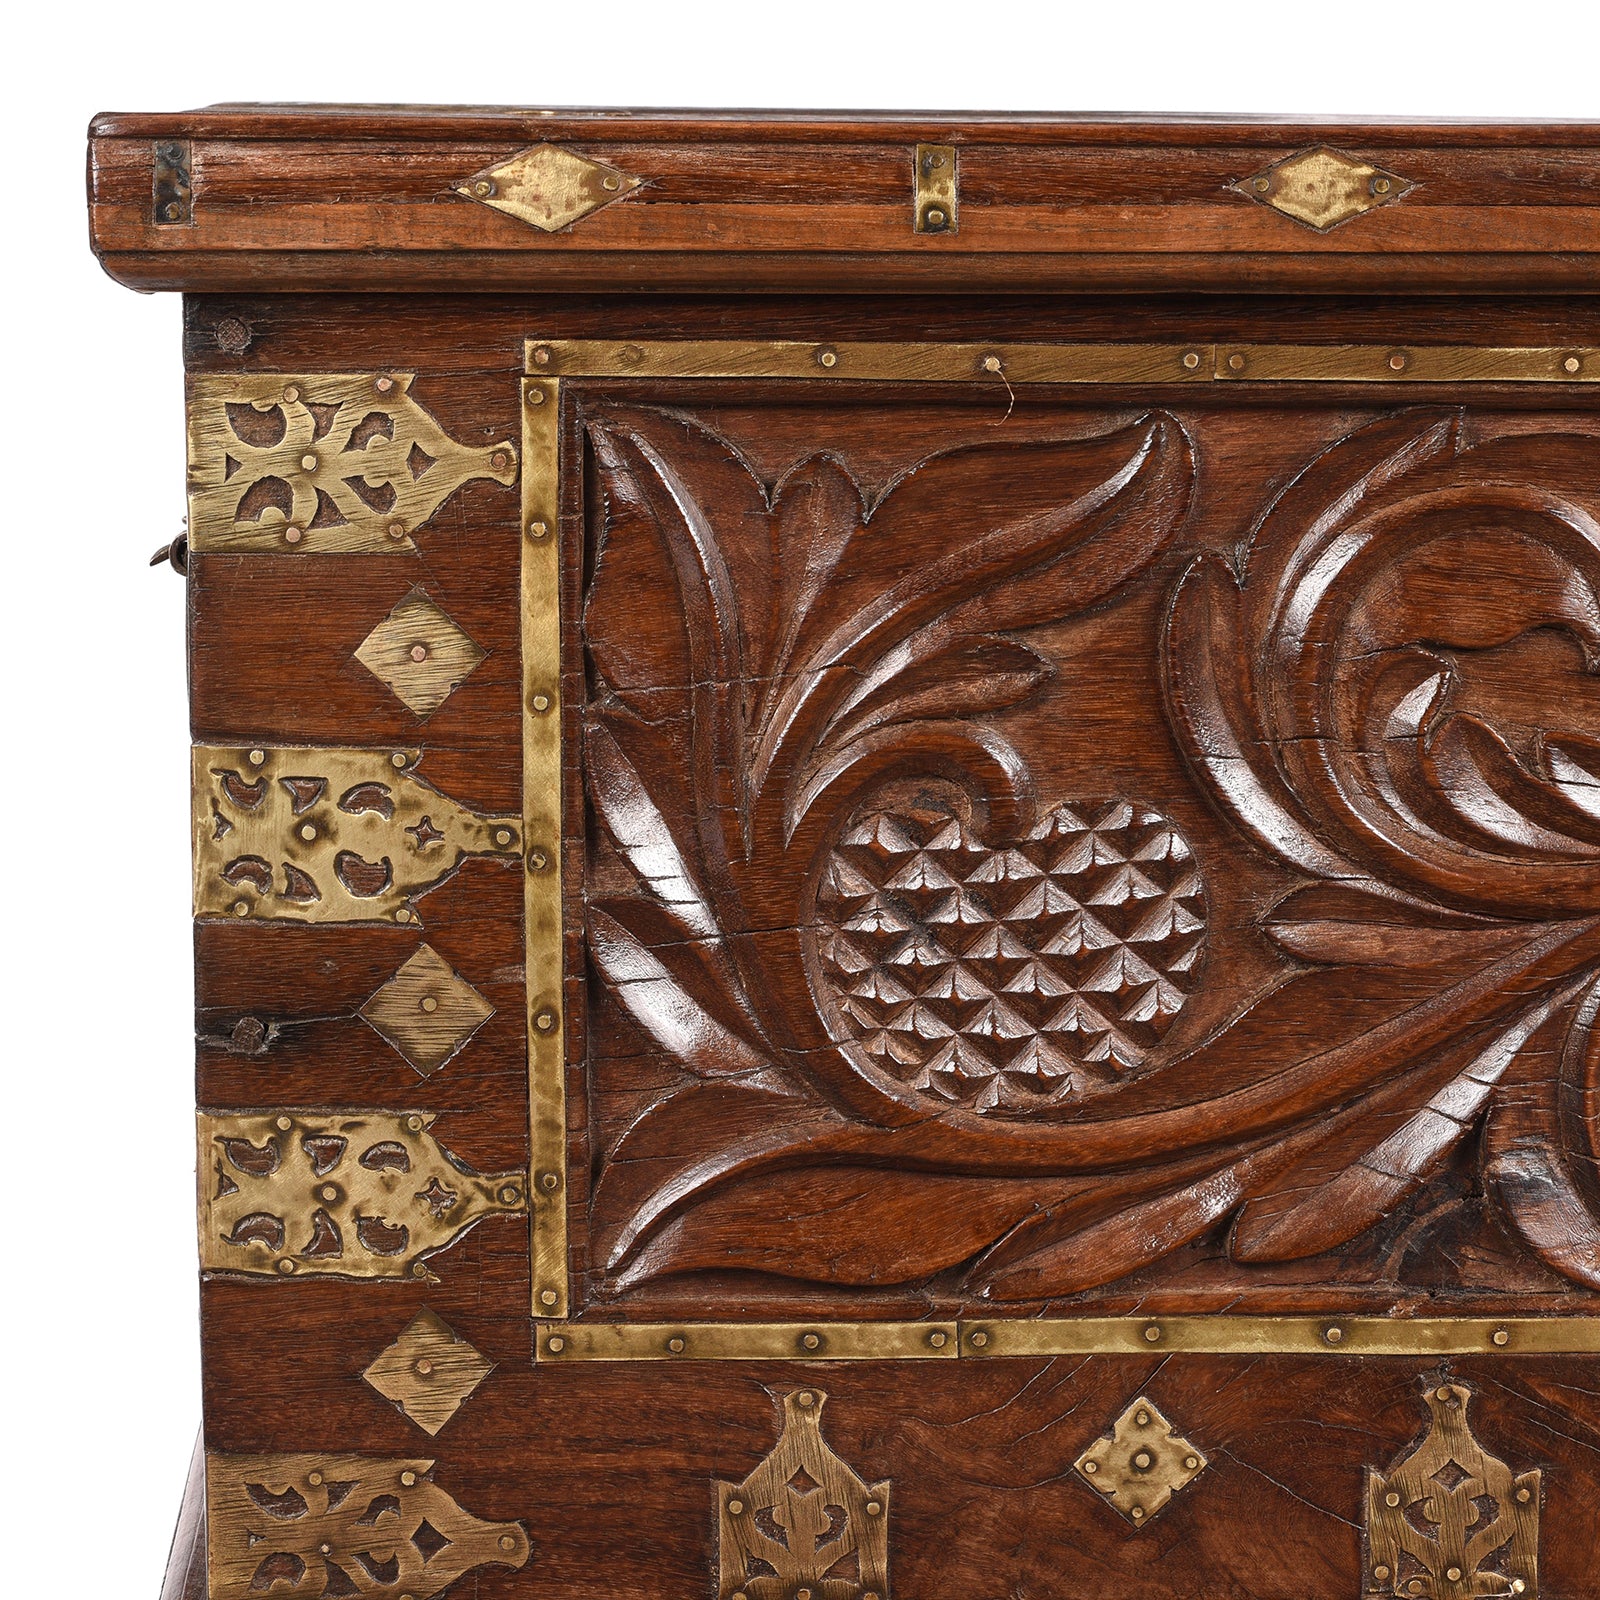 Antique Carved Malabar Chest From Kutch | Indigo Antiques